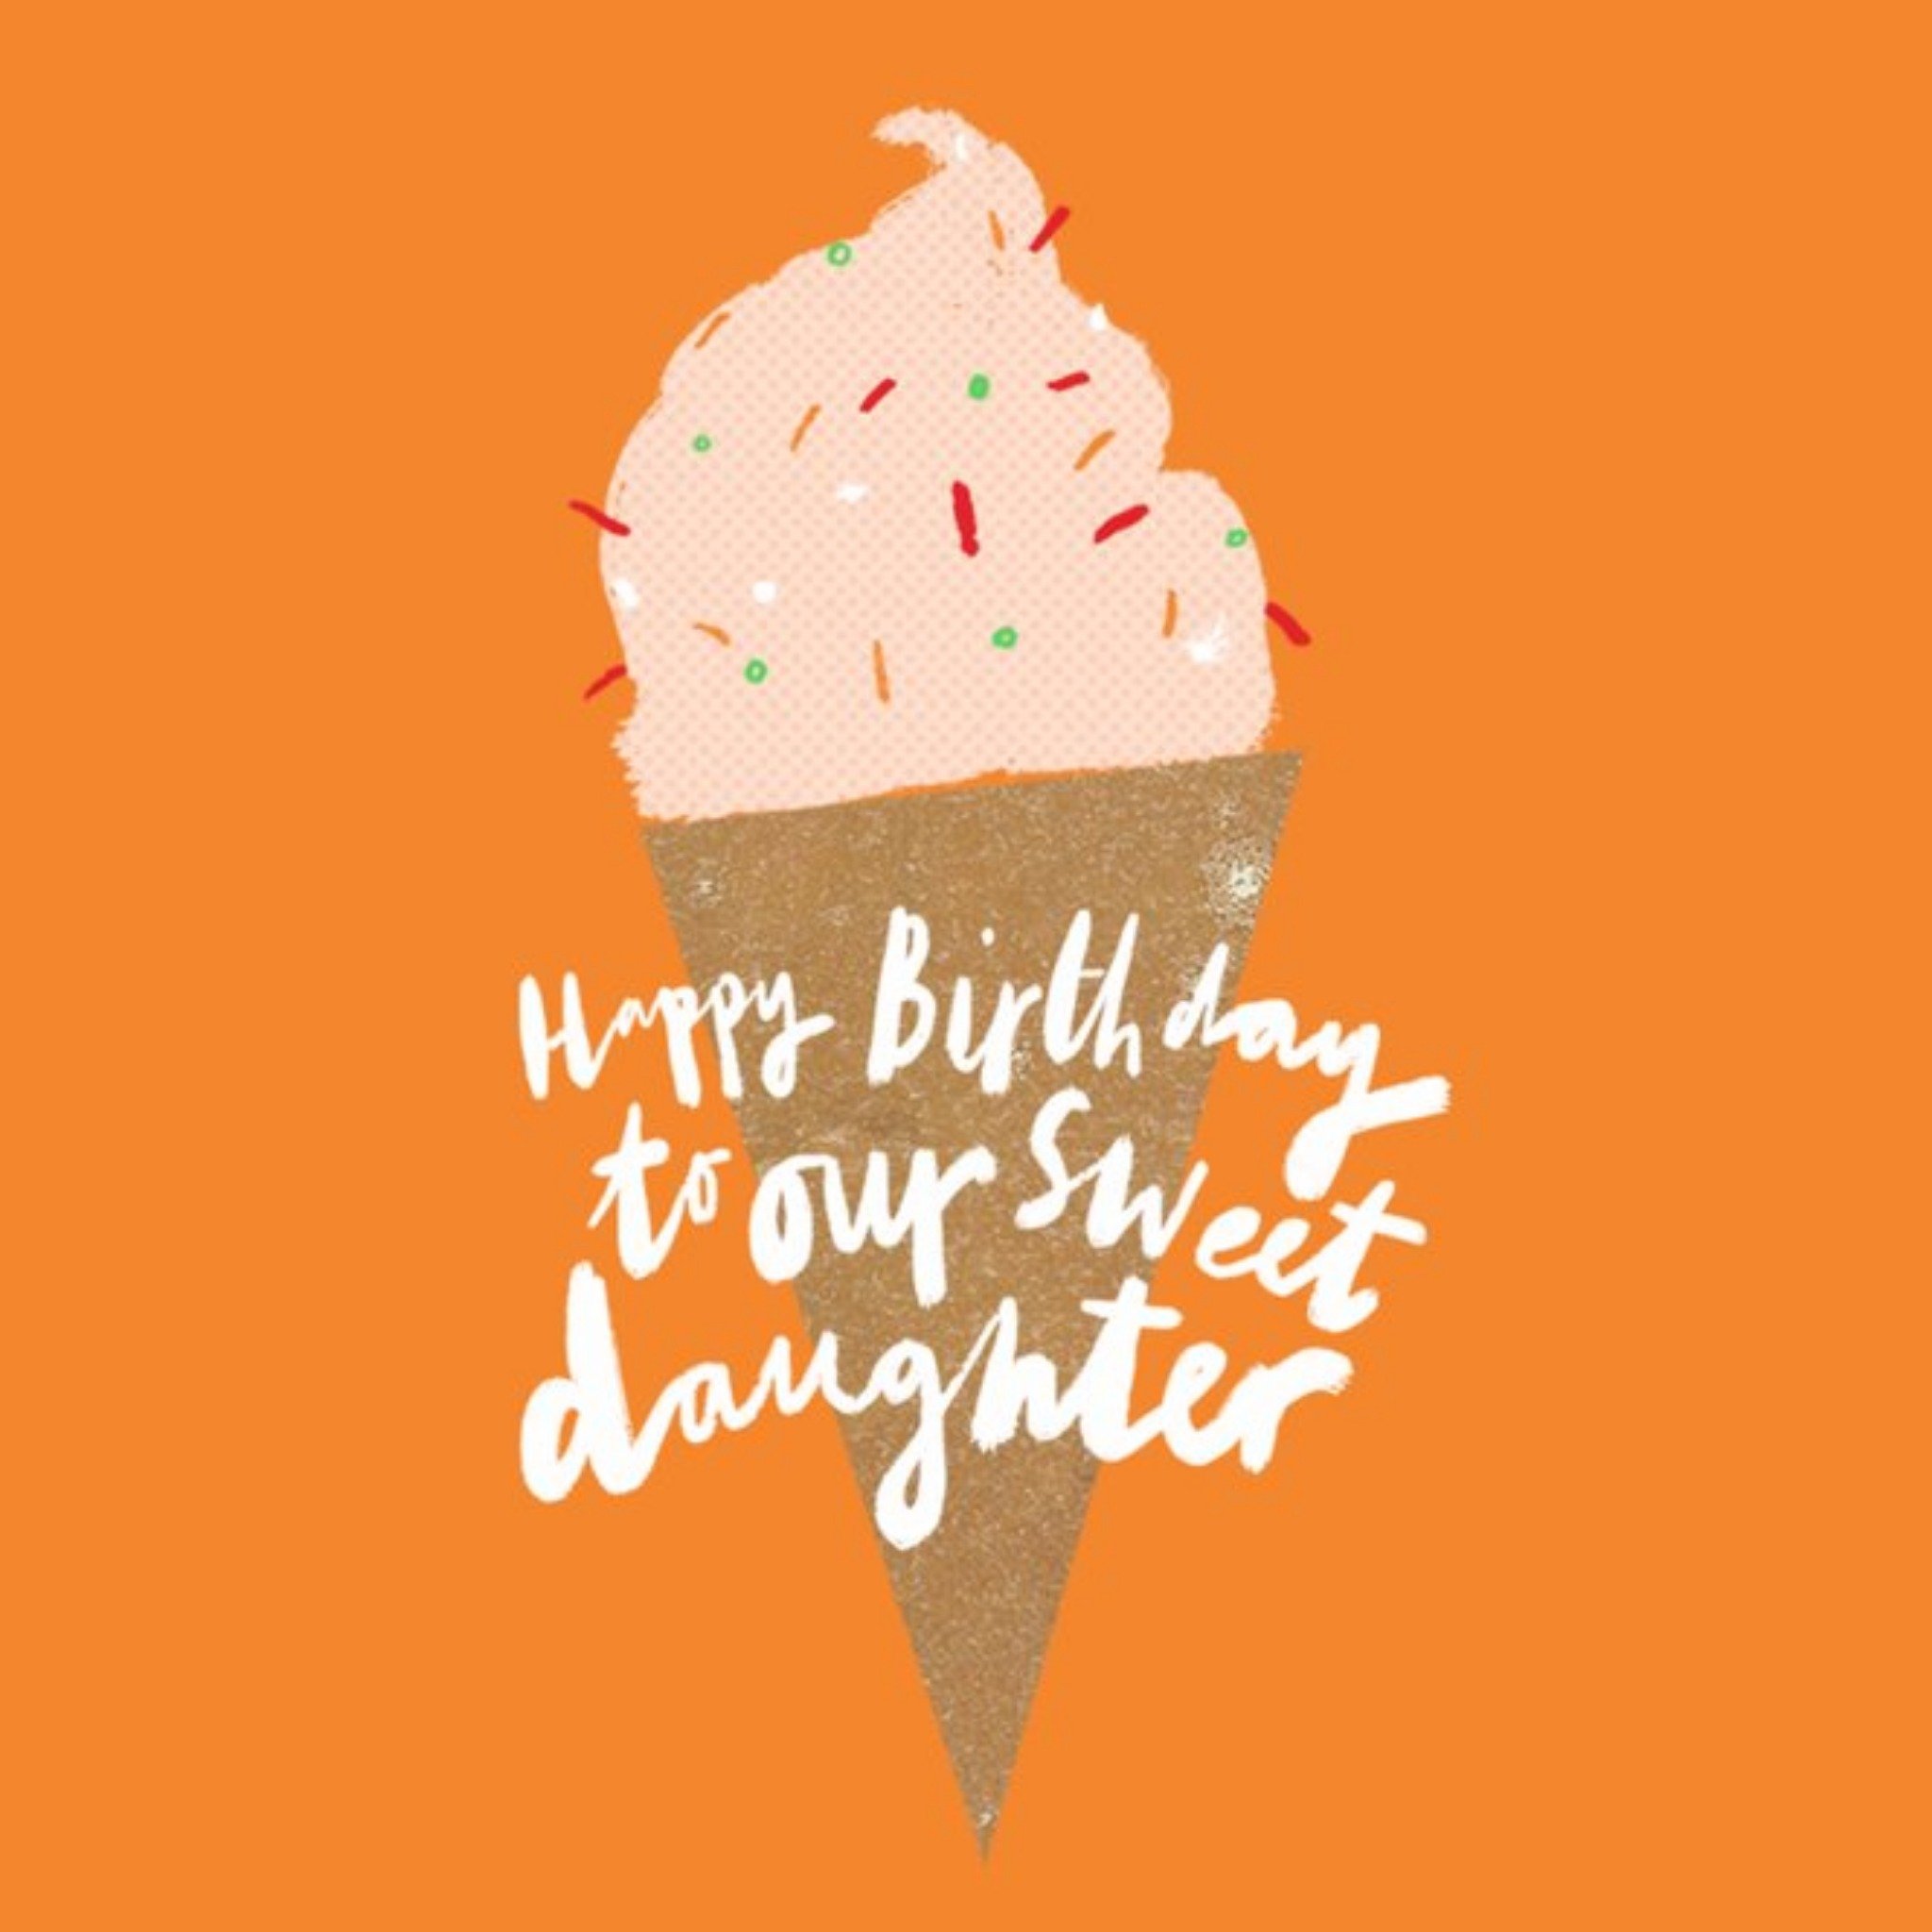 Moonpig Illustration Of An Icecream With Handwritten Typography Daughter's Birthday Card, Square